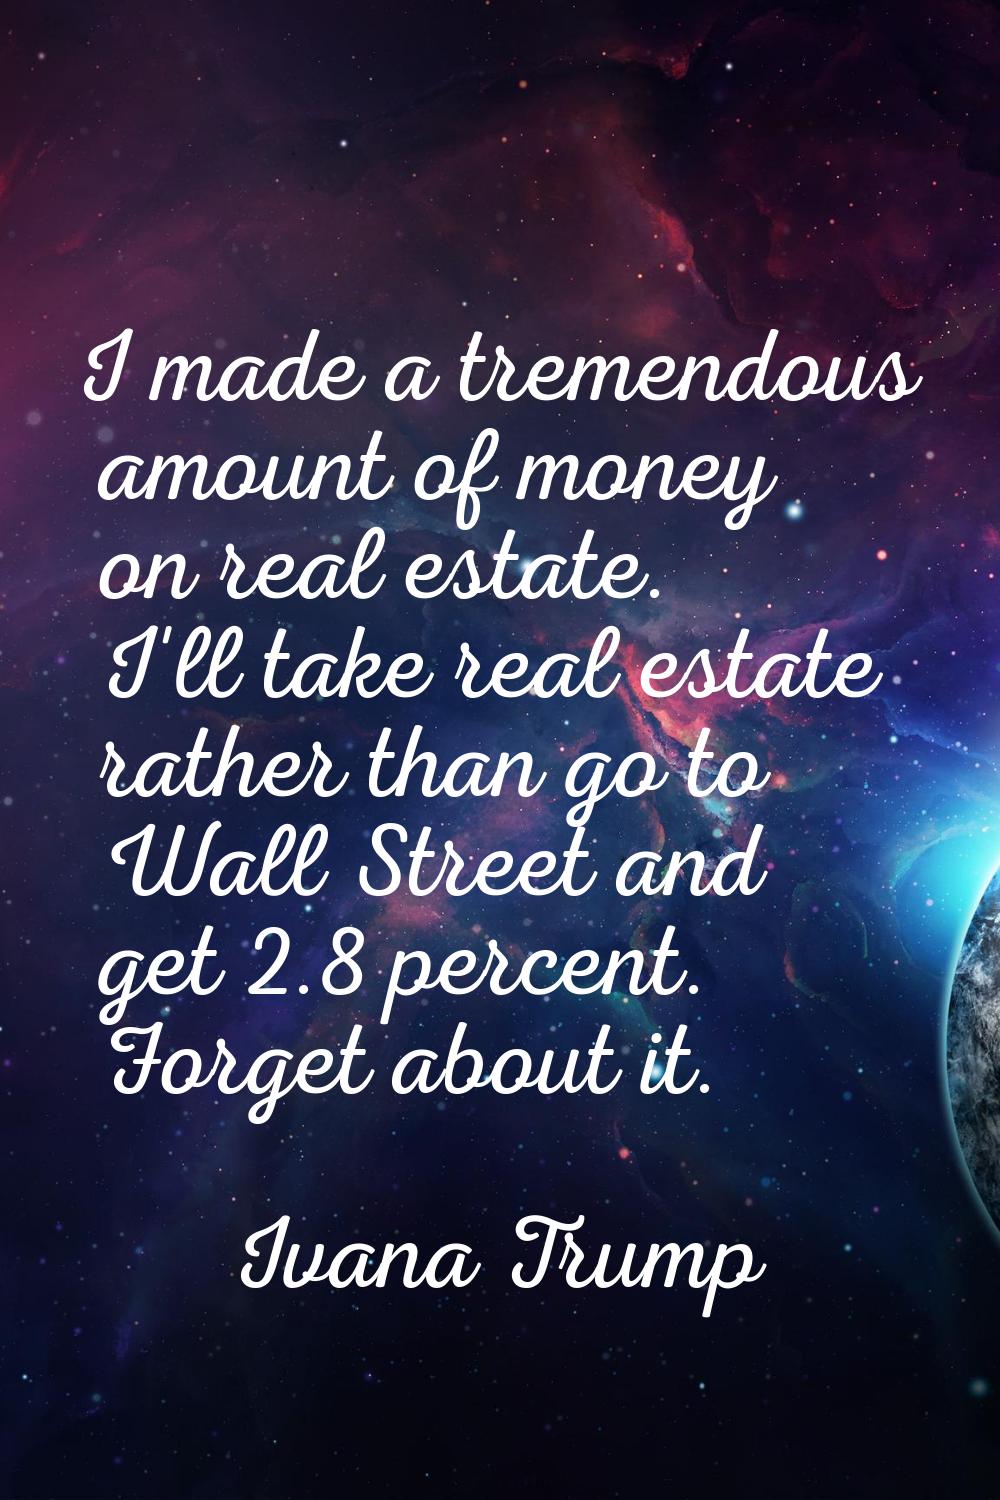 I made a tremendous amount of money on real estate. I'll take real estate rather than go to Wall St